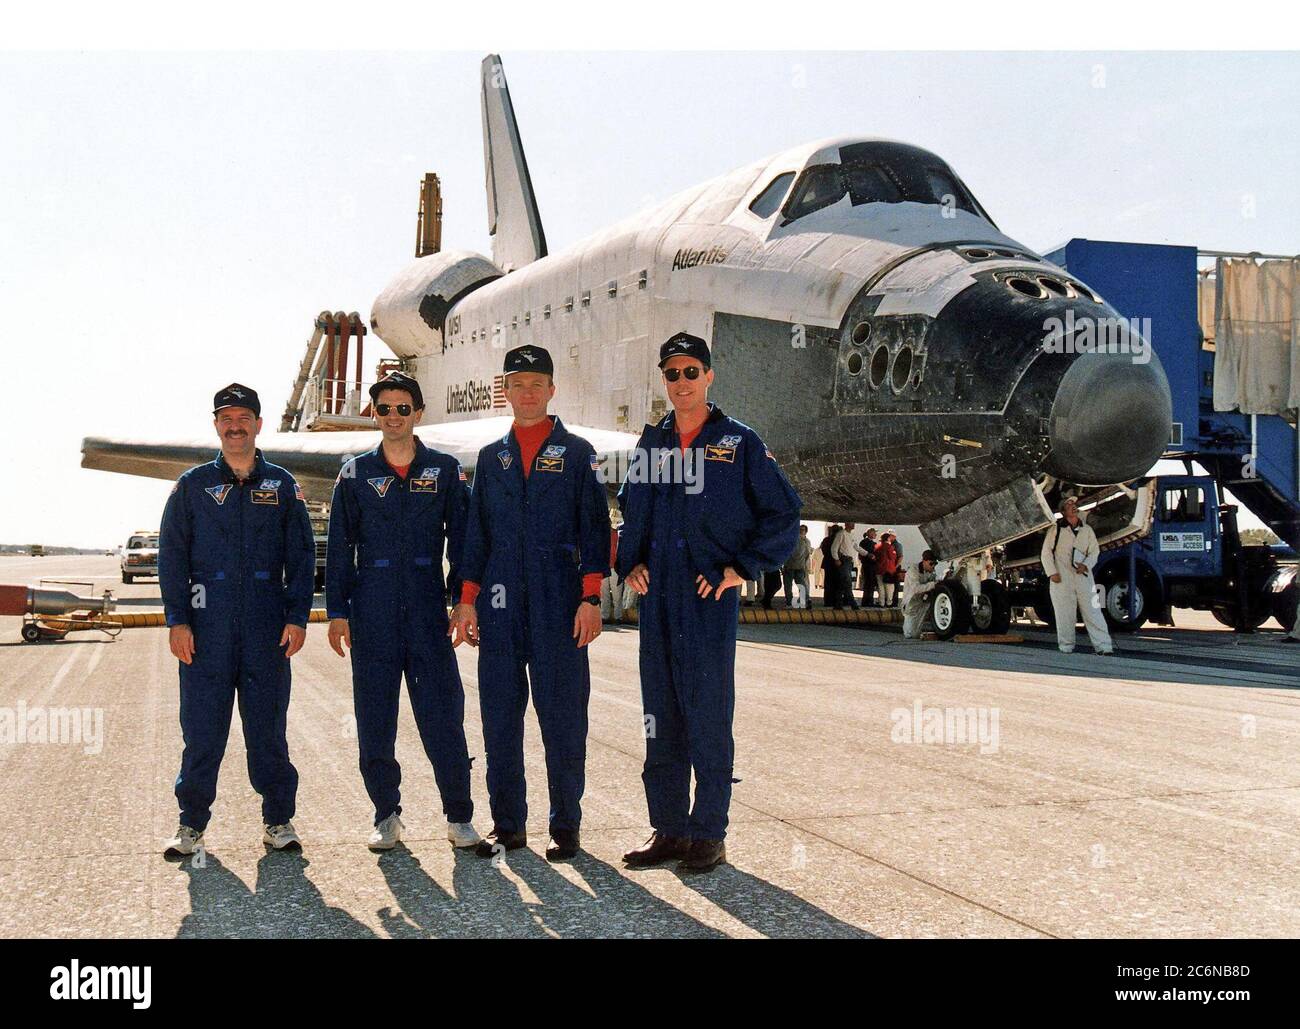 KENNEDY SPACE CENTER, FLA. -- Four members of the STS-81 crew pose in front of the Space Shuttle orbiter Atlantis on Runway 33 of KSC’s Shuttle Landing Facility after the space plane touched down at 9:22:44 a.m. EST Jan. 22 to conclude the fifth Shuttle-Mir docking mission. The crew members are (from left): Mission Specialists John M. Grunsfeld and Peter J. K. 'Jeff' Wisoff ; Pilot Brent W. Jett, Jr.; and Mission Commander Michael A. Baker. Stock Photo